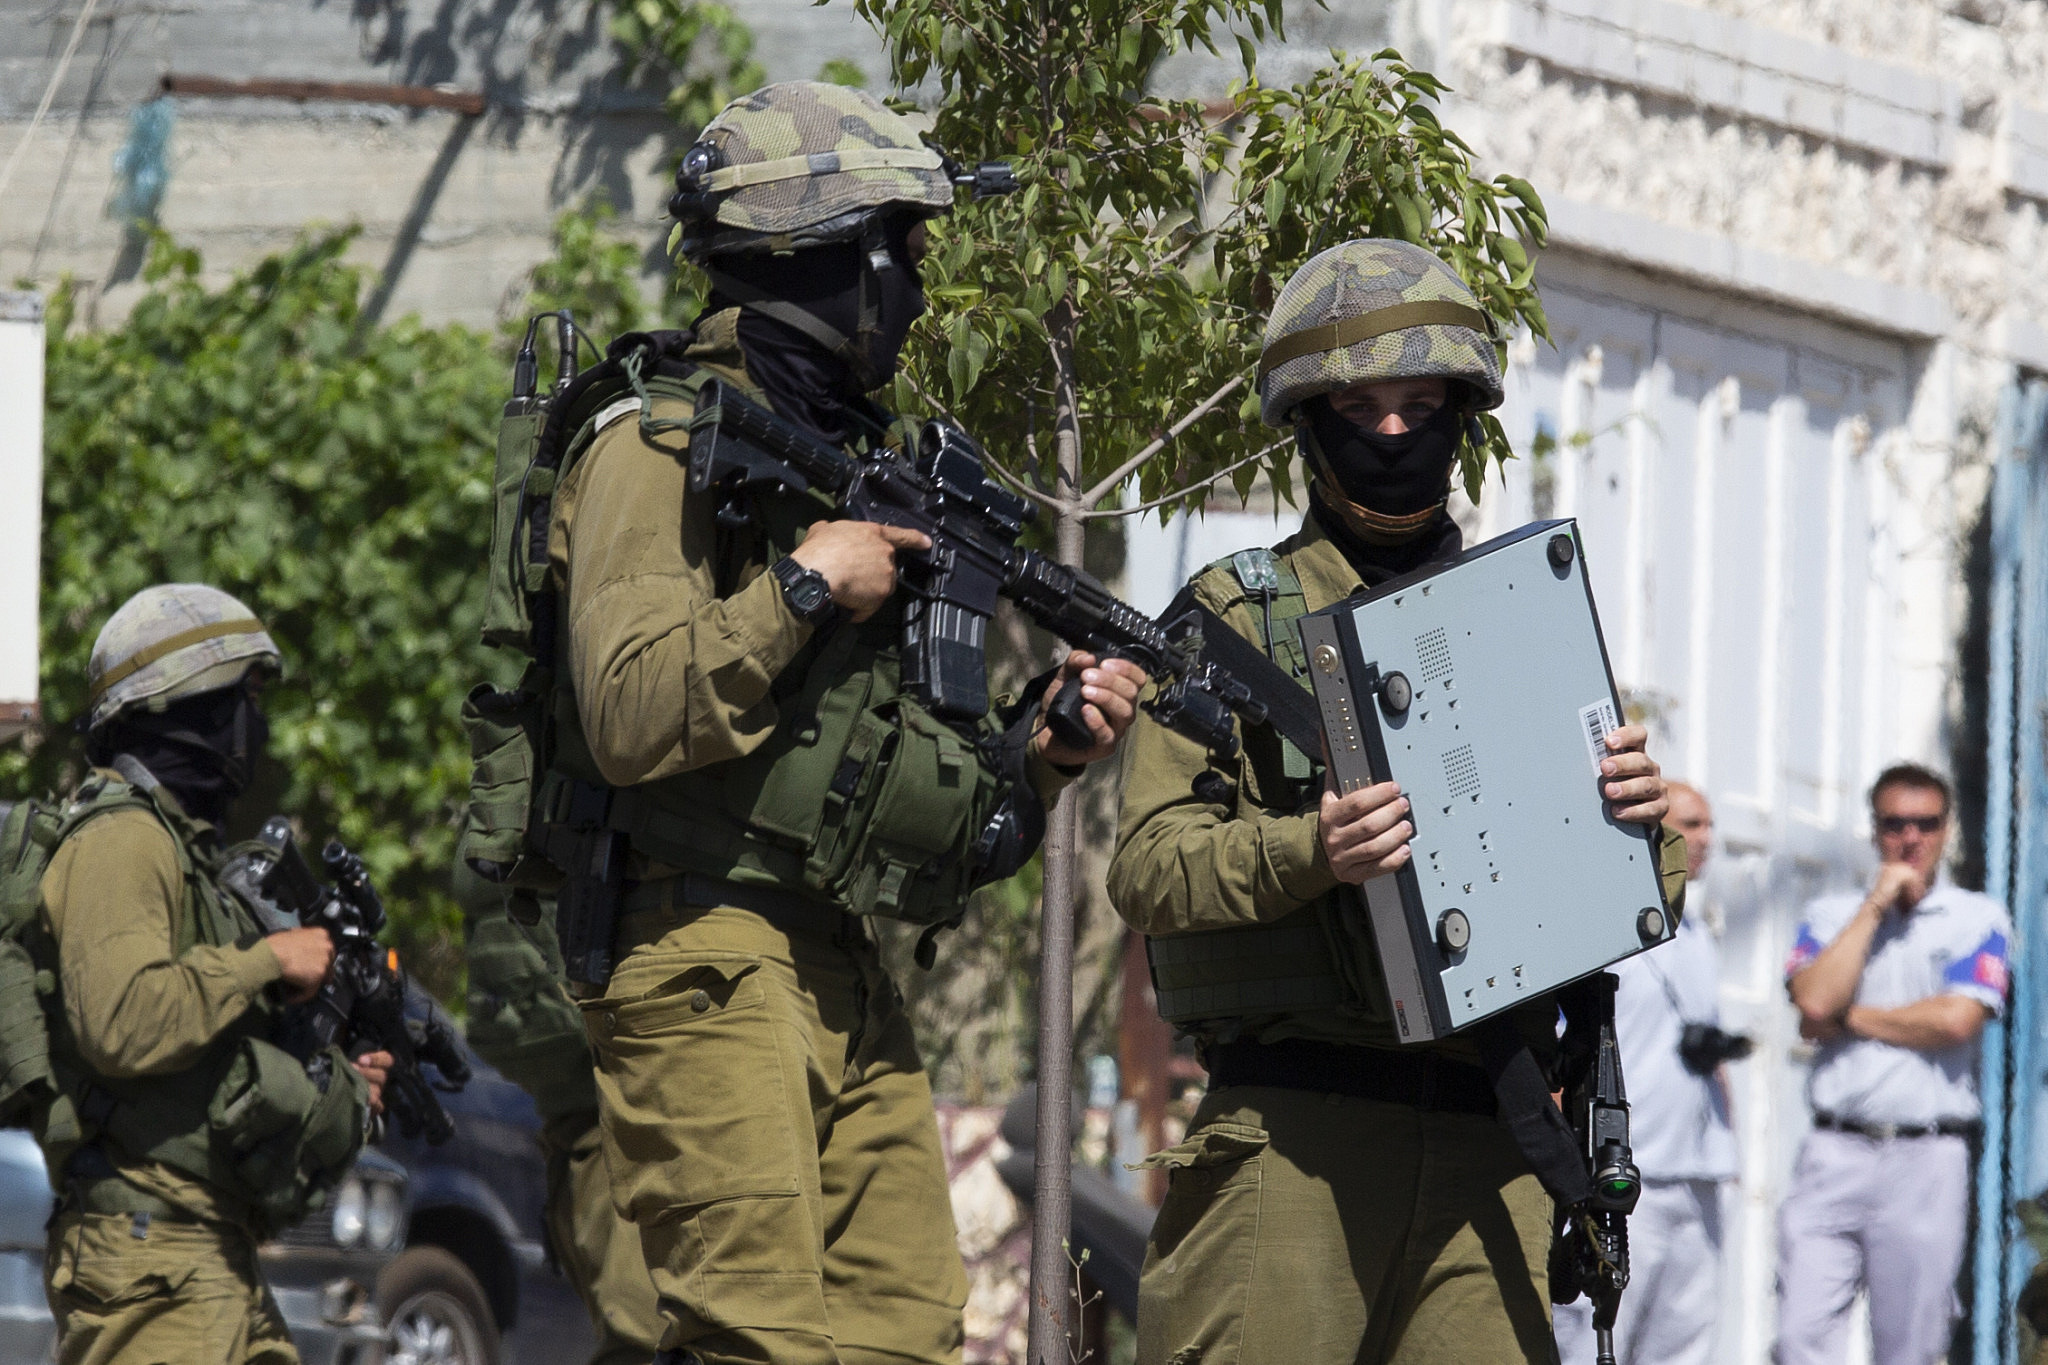 Illustrative photo of Israeli soldiers taking part in a raid on the West Bank city of Hebron, June 18, 2014. (Oren Ziv)